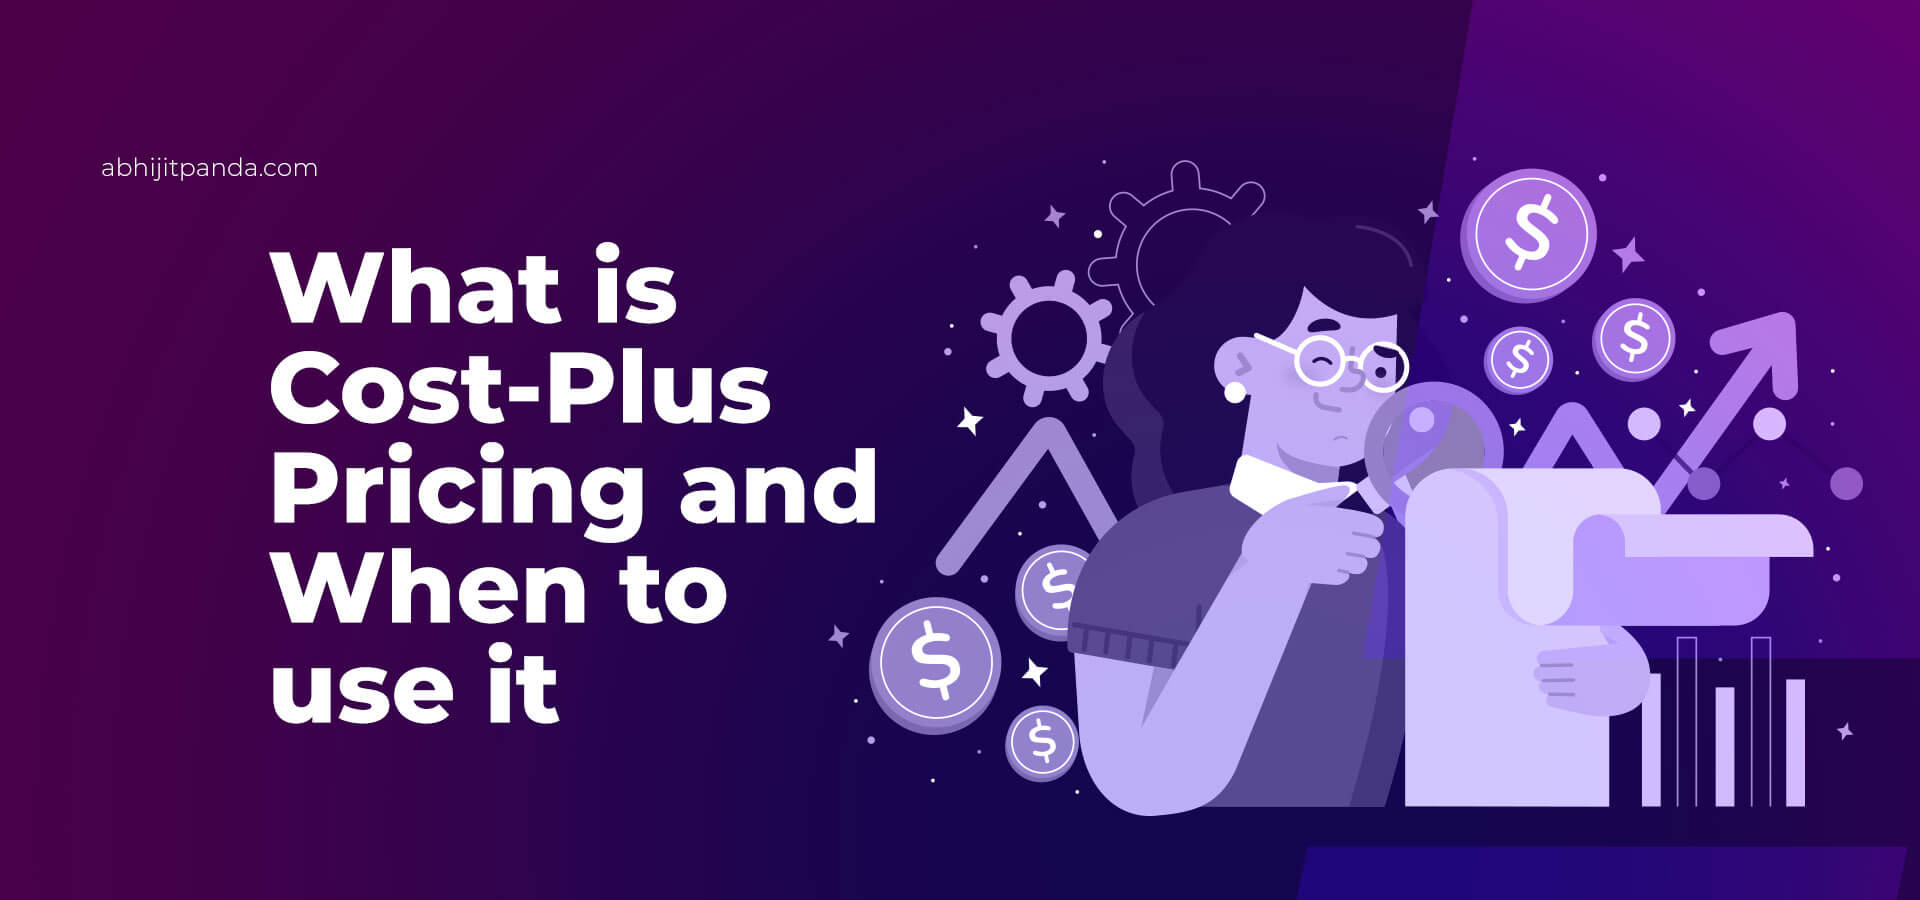 What is Cost Plus Pricing and When to use it